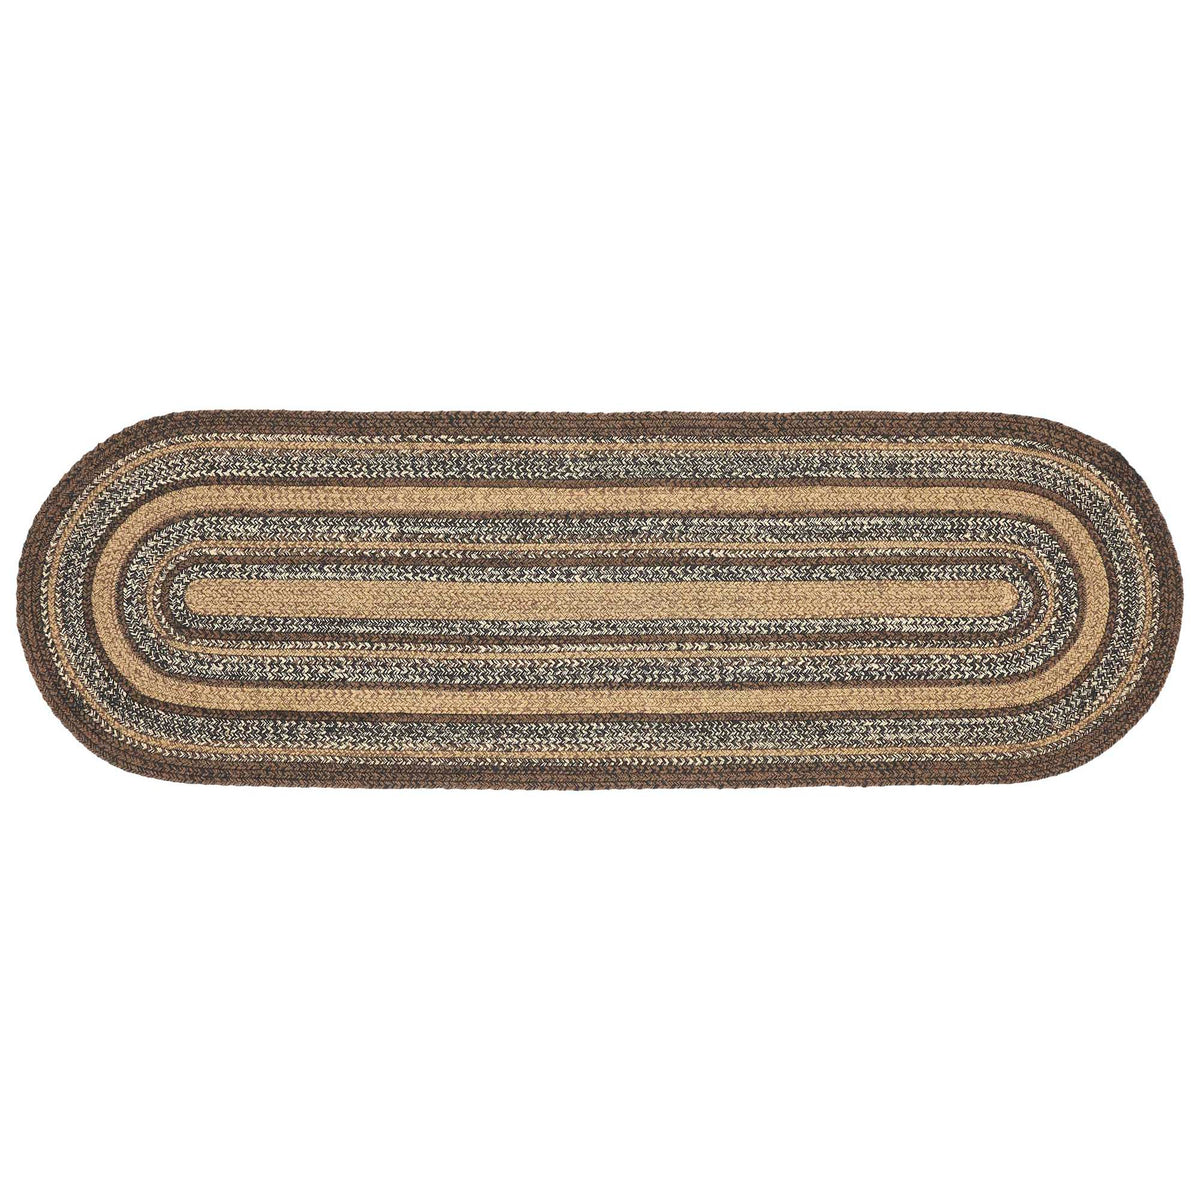 Colonial Star Jute Braided Rug/Runner Oval with Rug Pad 22x72